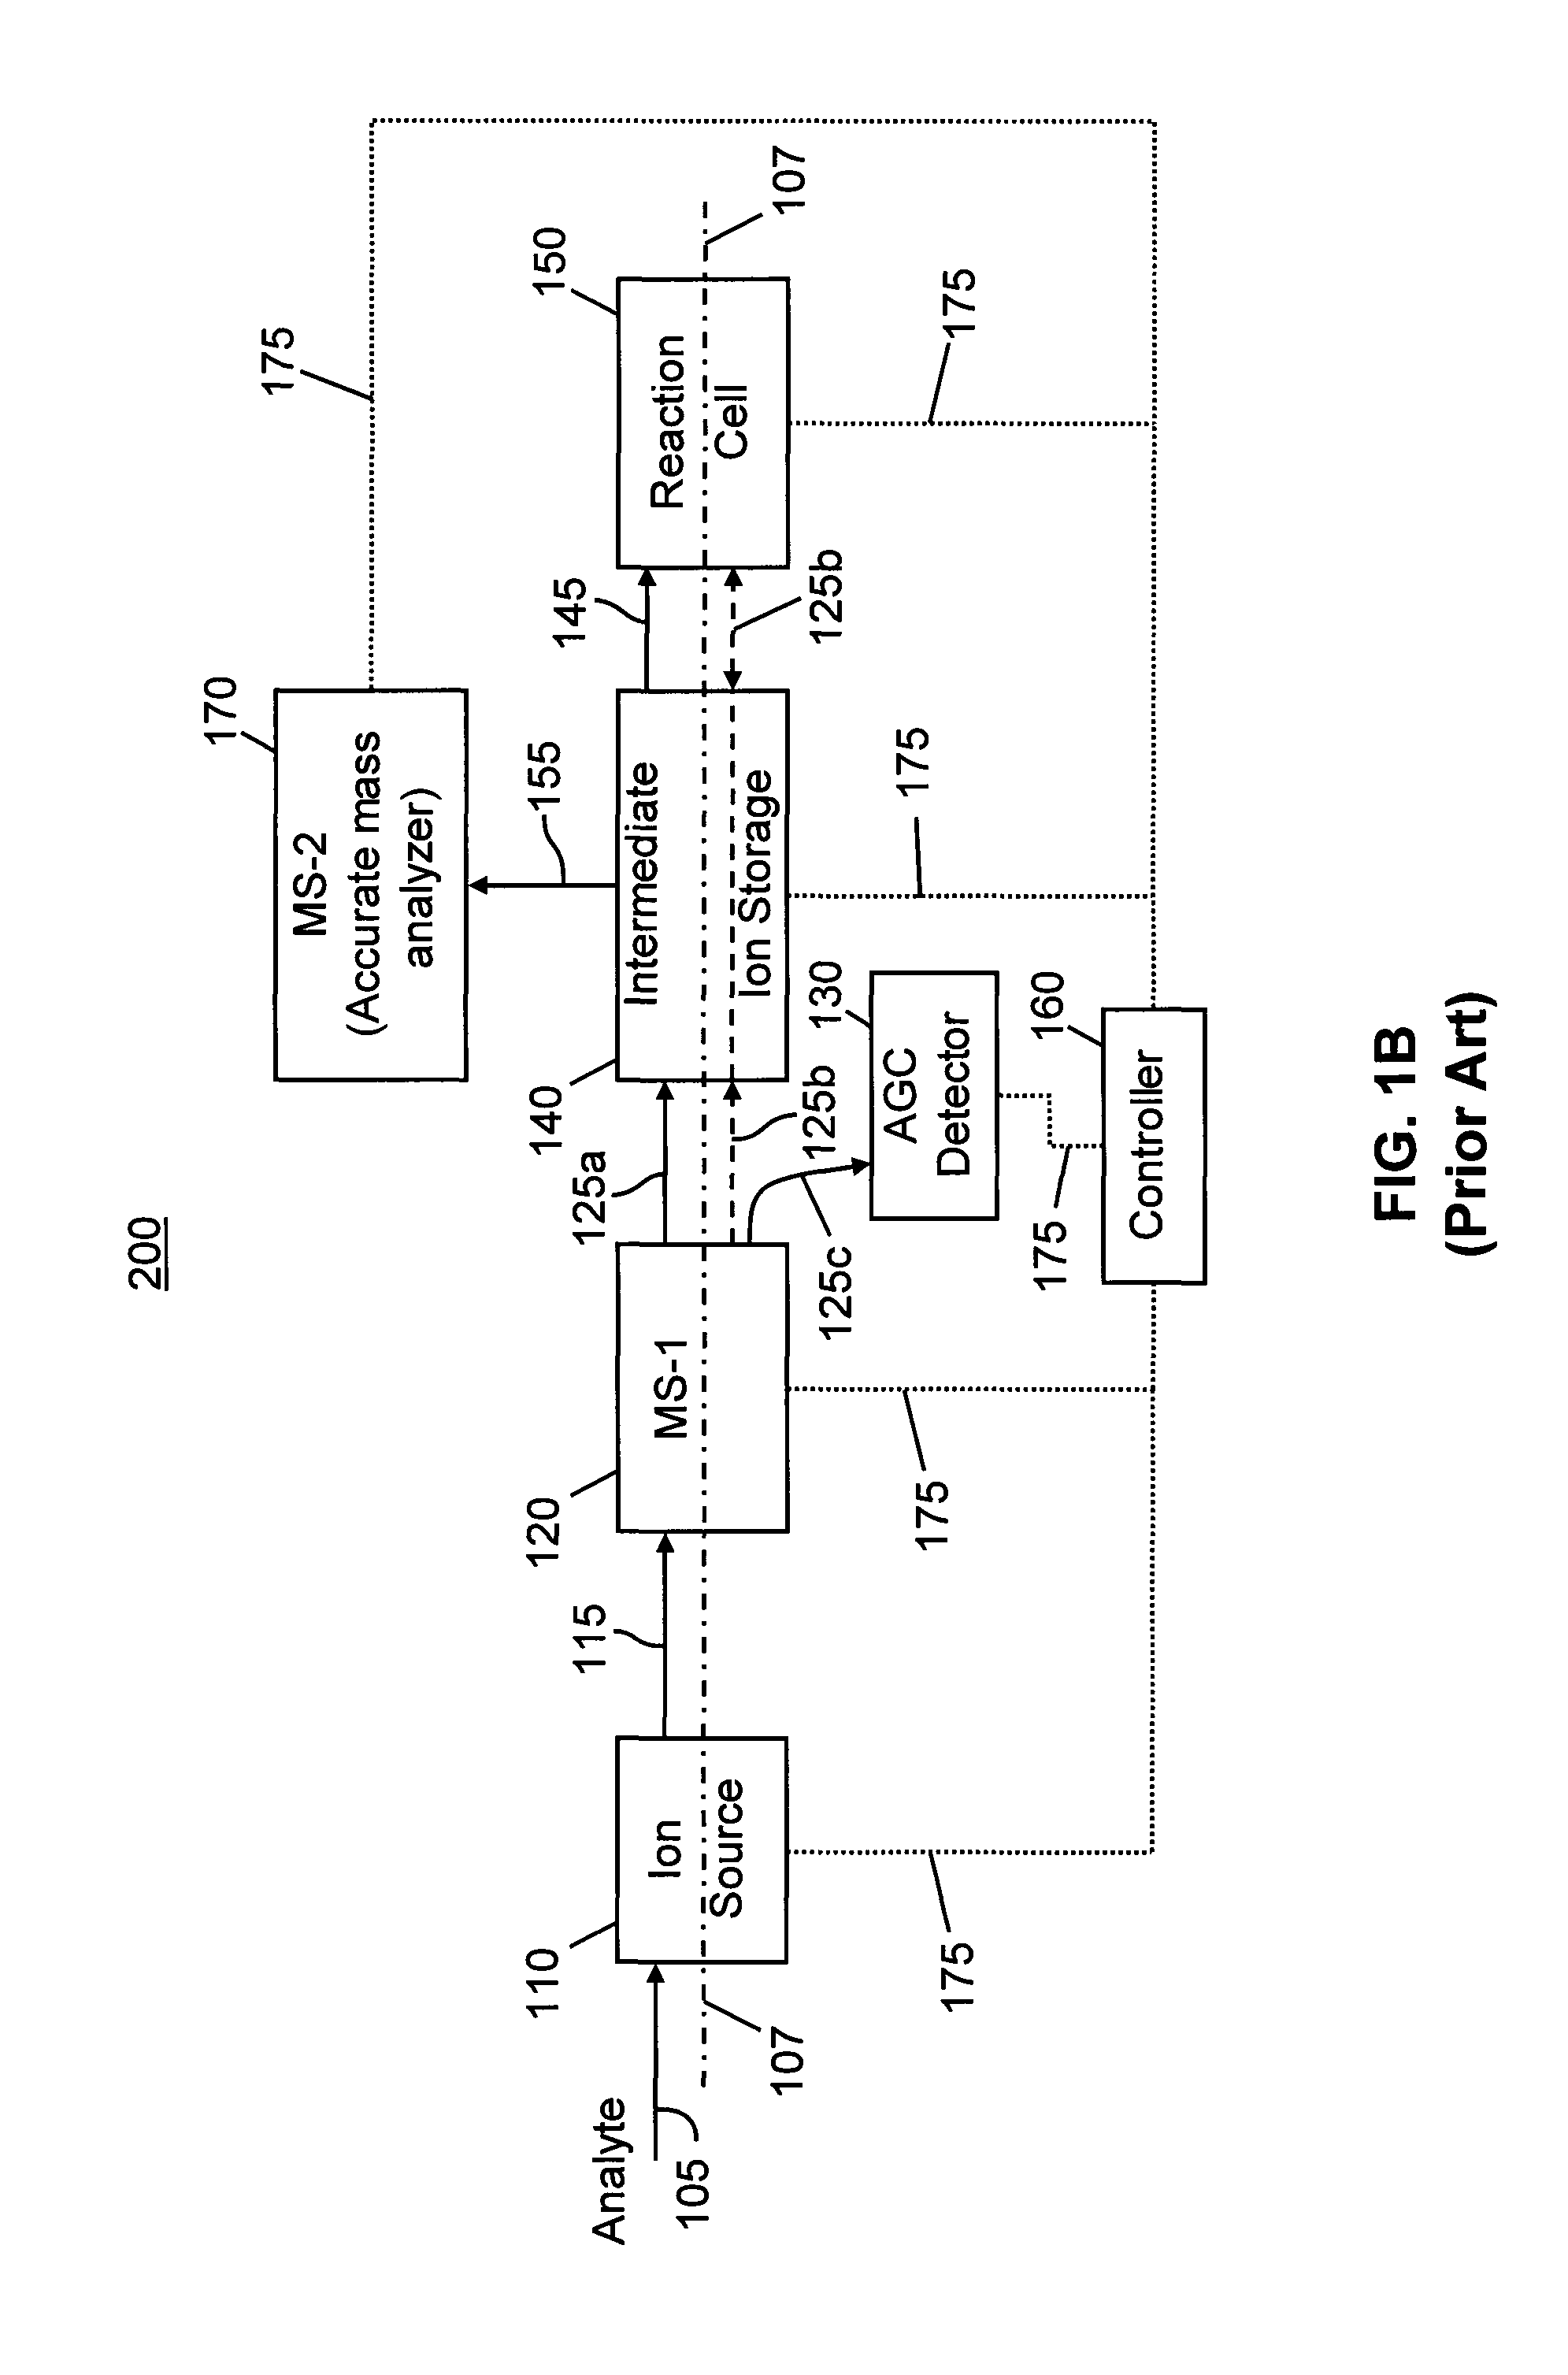 Methods and systems for matching product ions to precursor in tandem mass spectrometry